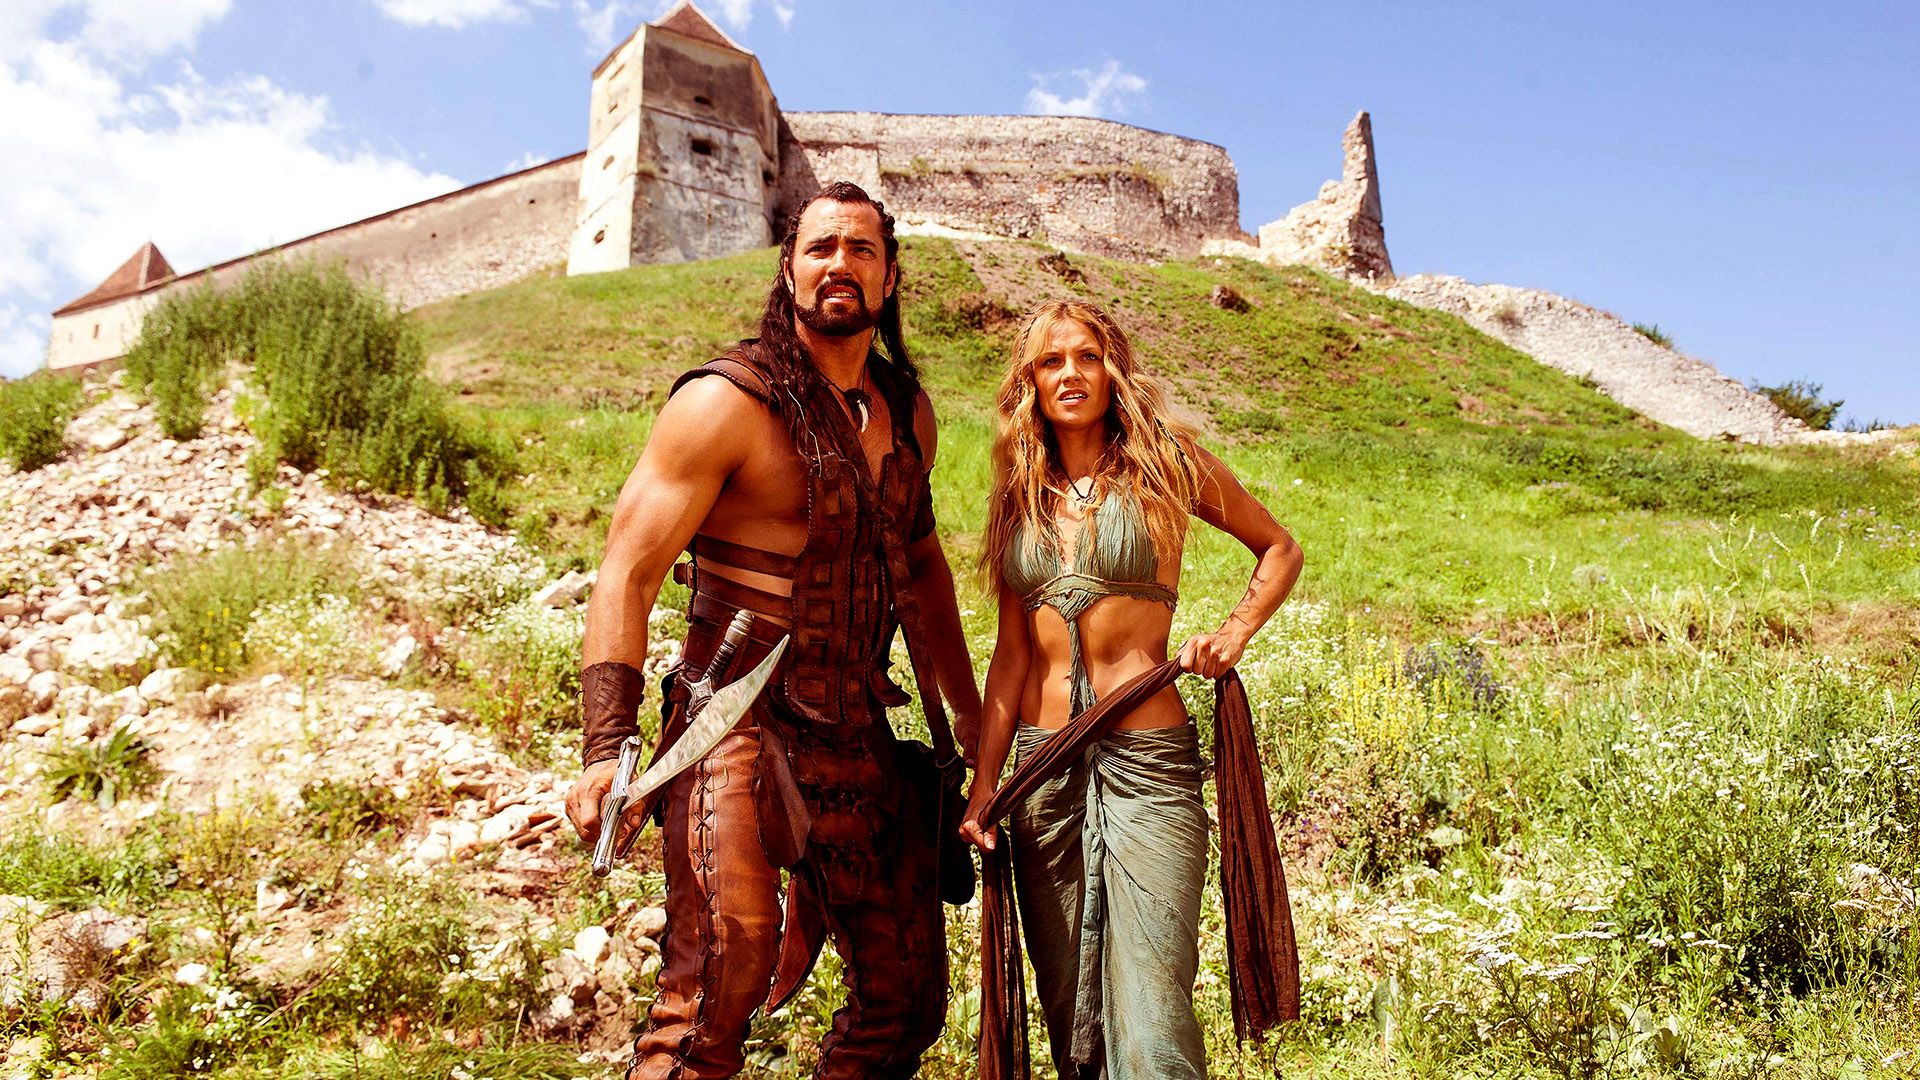 The Scorpion King 4: Quest for Power background